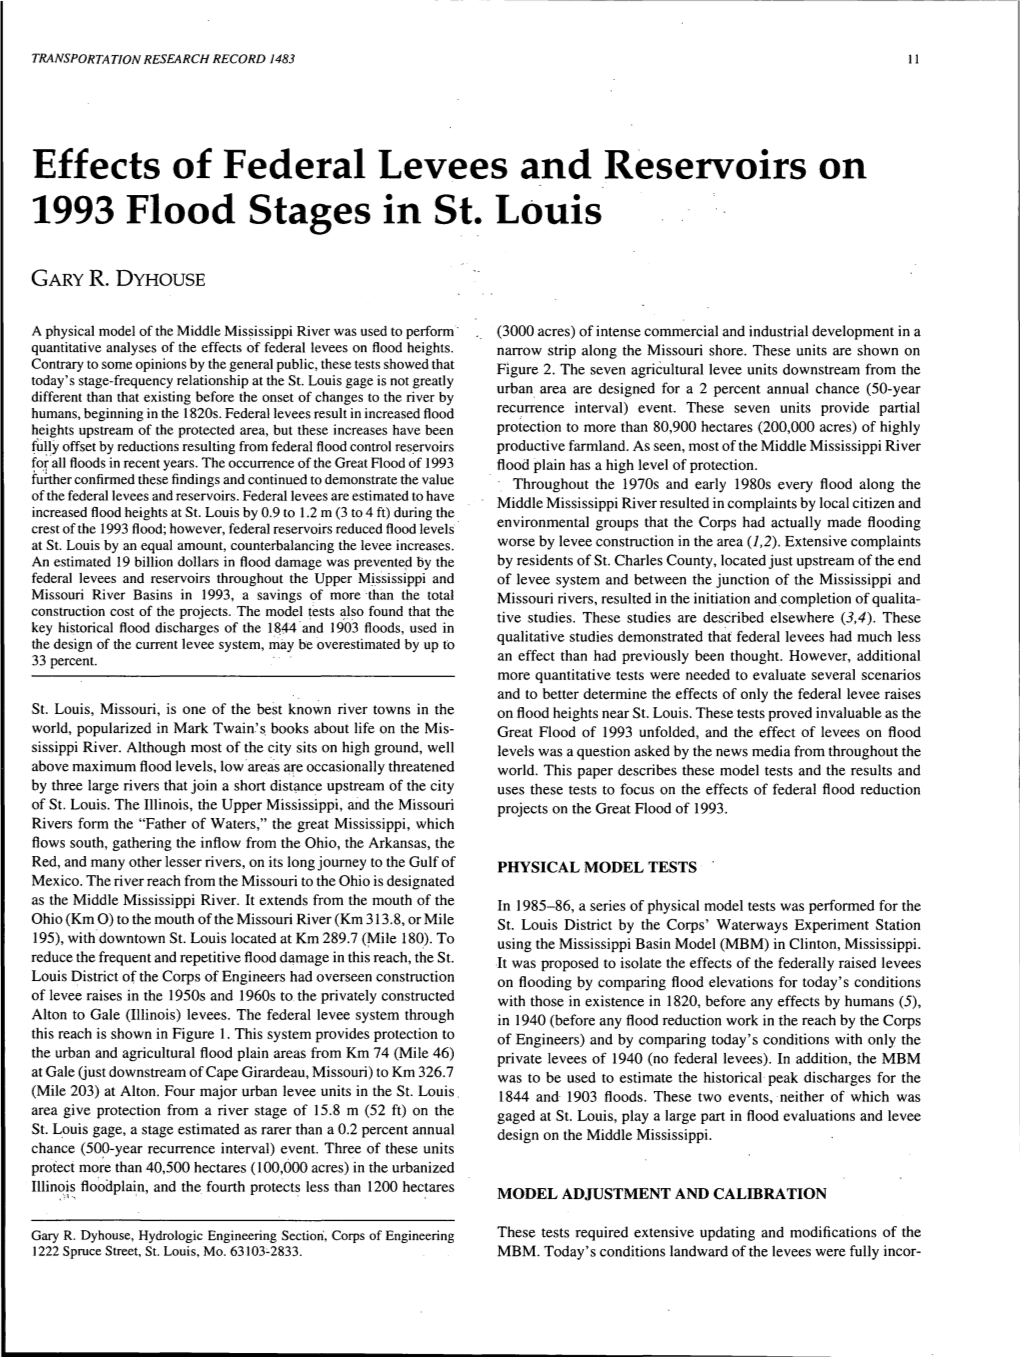 Transporation Research Record No. 1483, 1993 Midwest Floods And